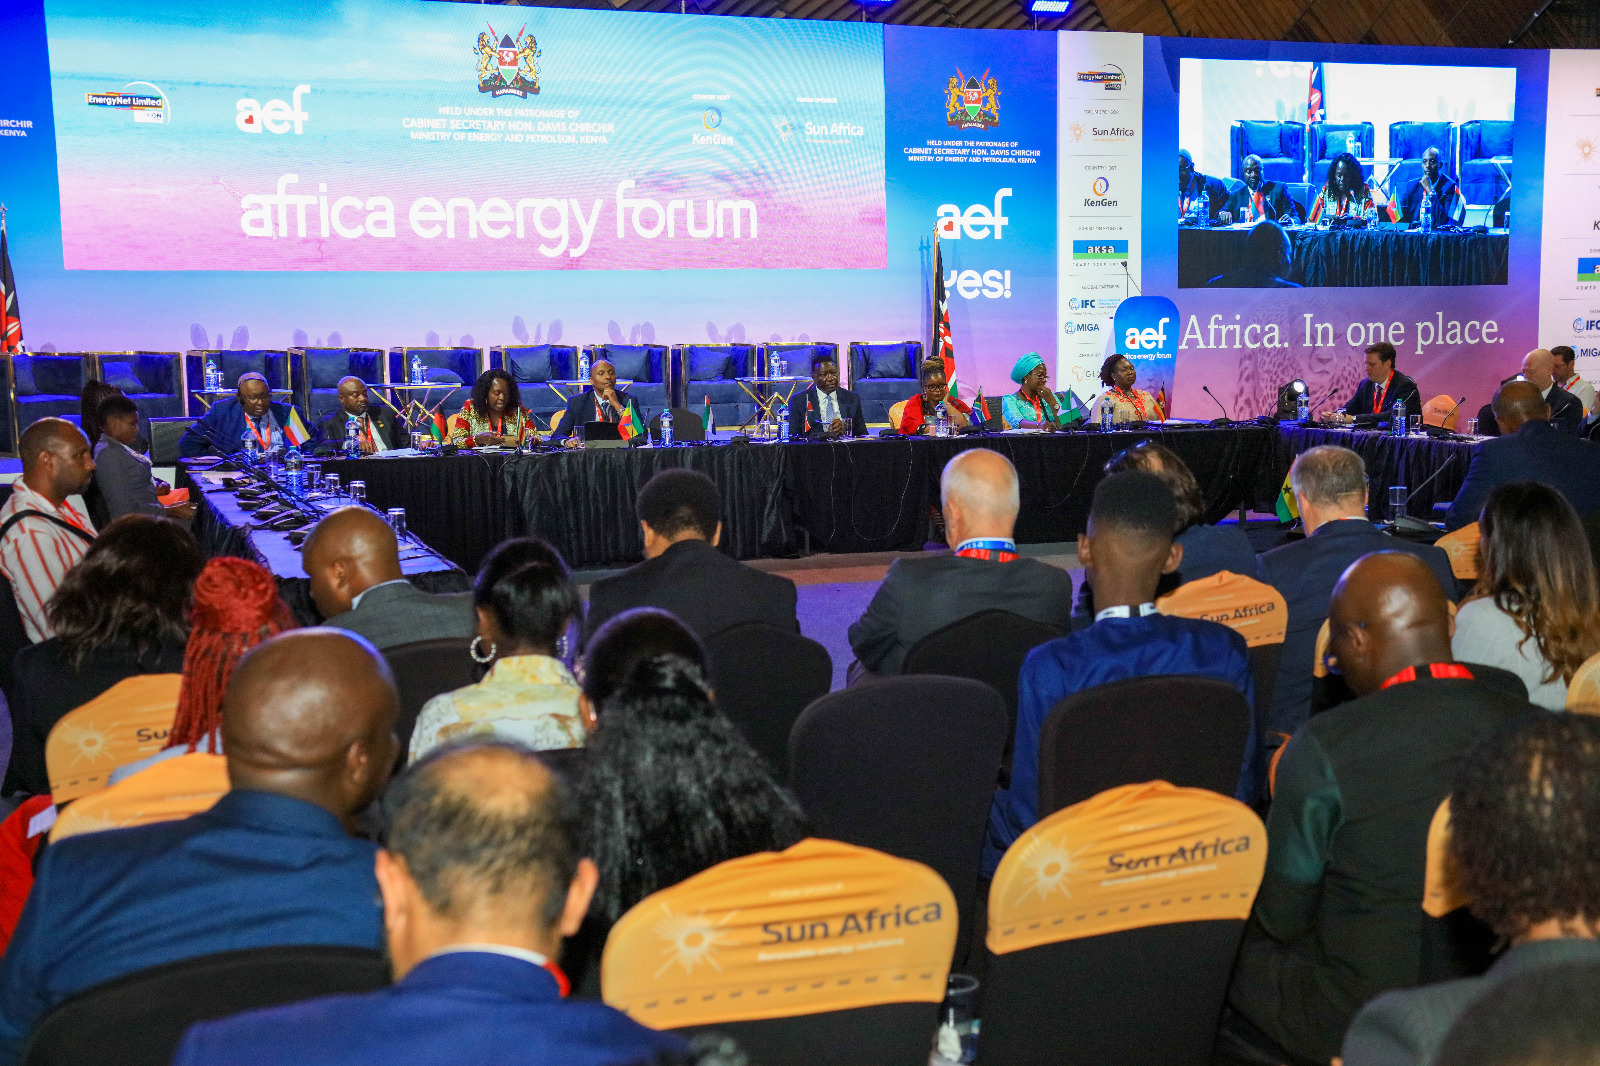 Kenya Hands Baton to Egypt for aef24 as Africa Energy Forum, aef23 Ends in Nairobi